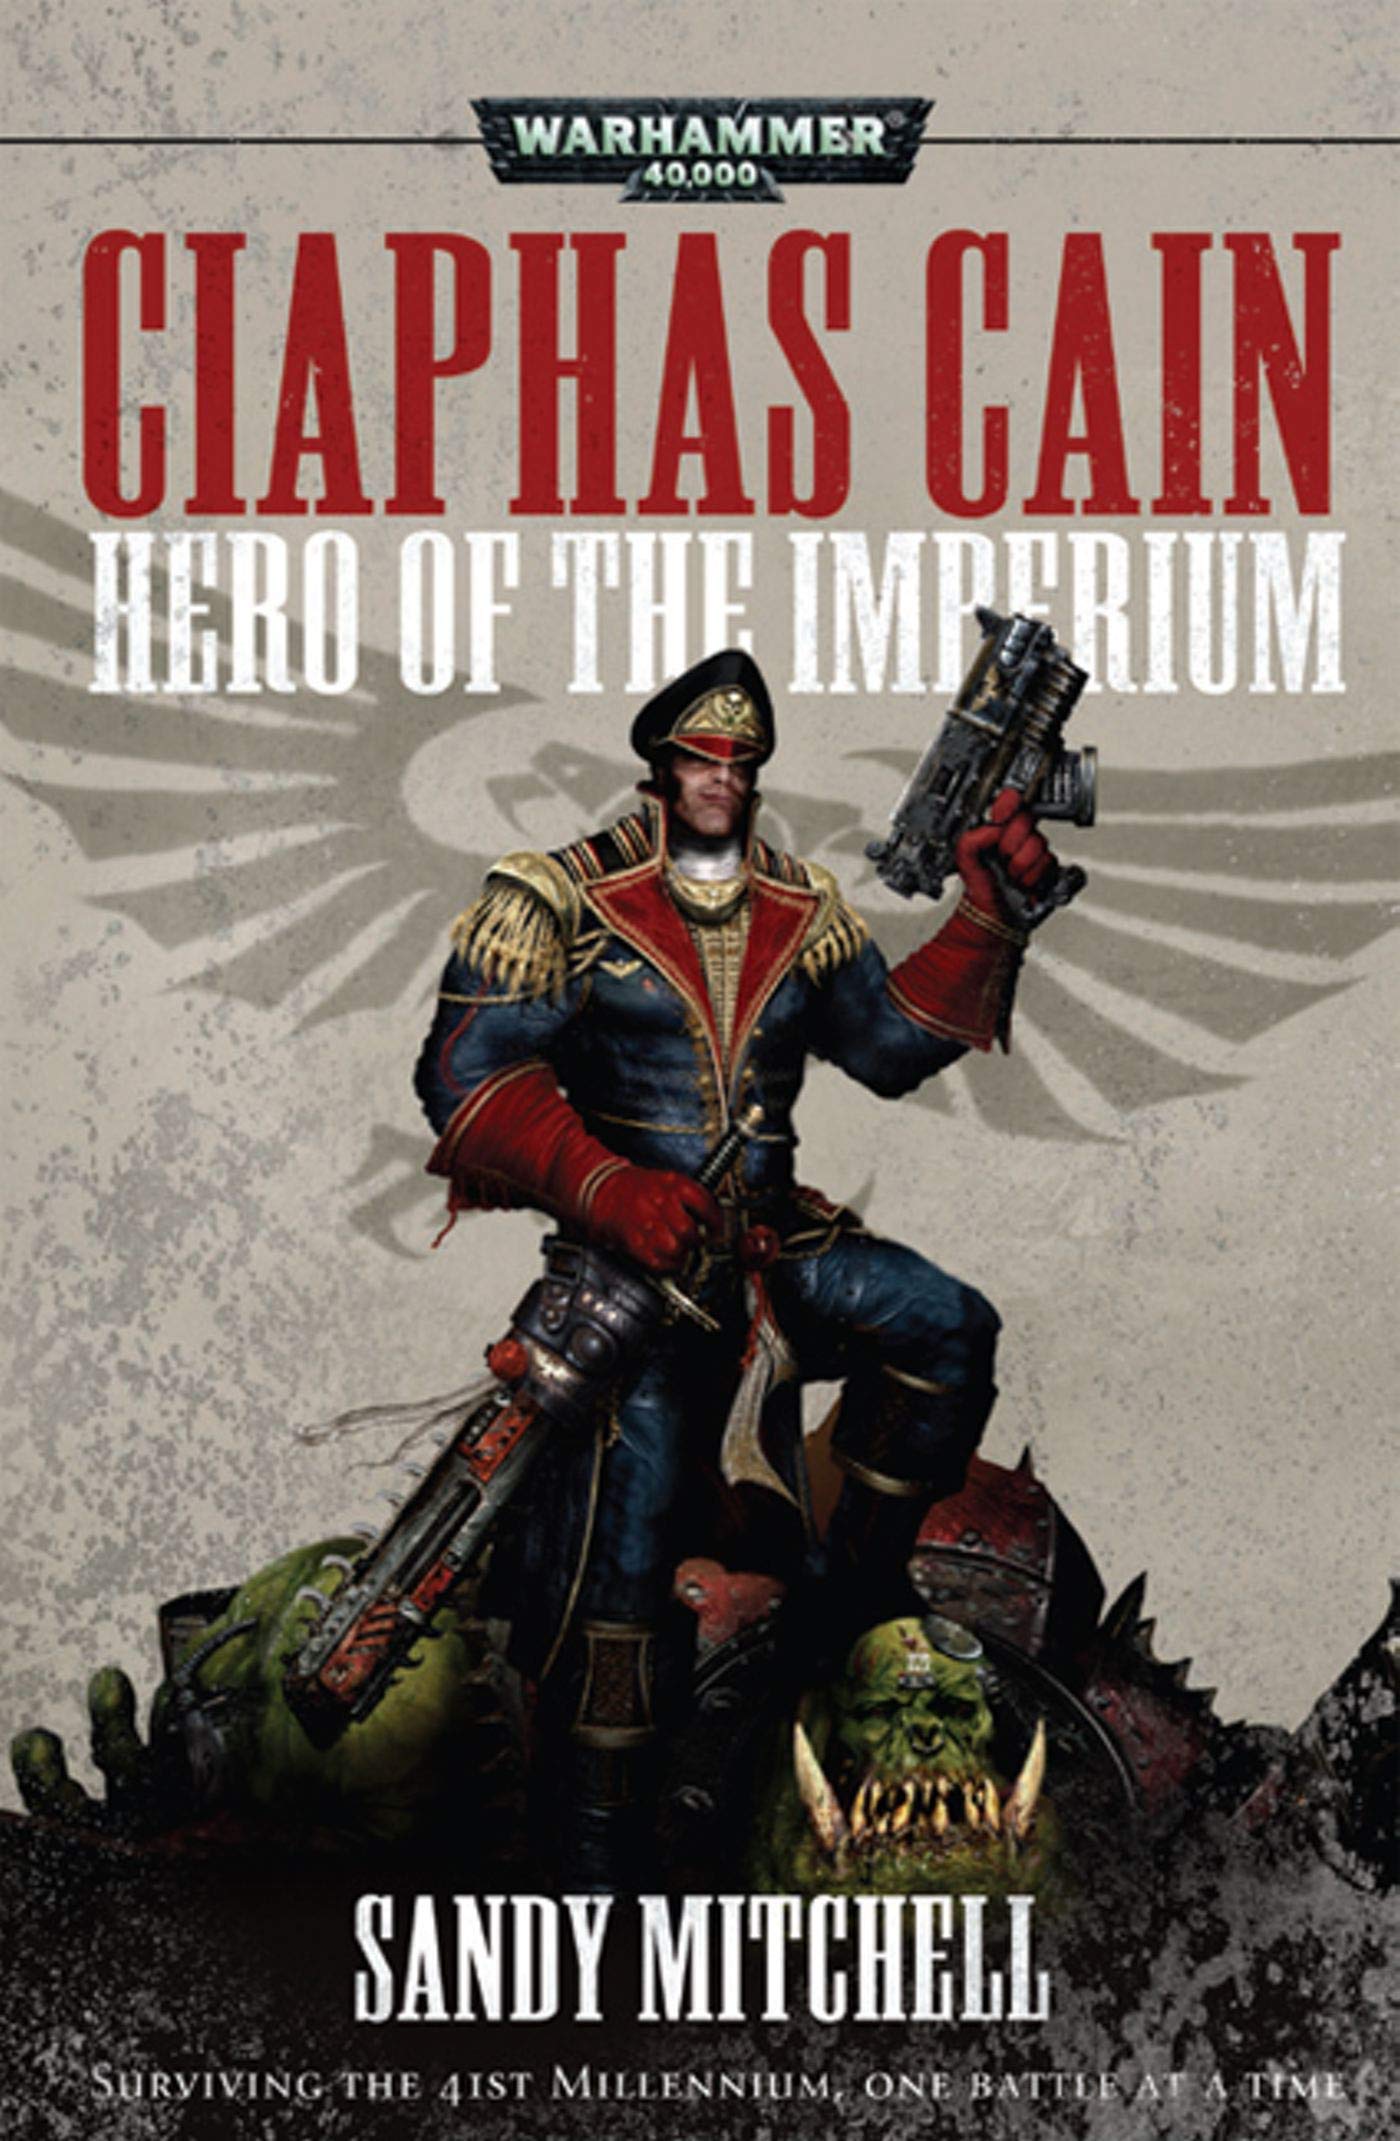 HERO OF THE IMPERIUM (Warhammer 40,000) Novel by Sandy Mitchell